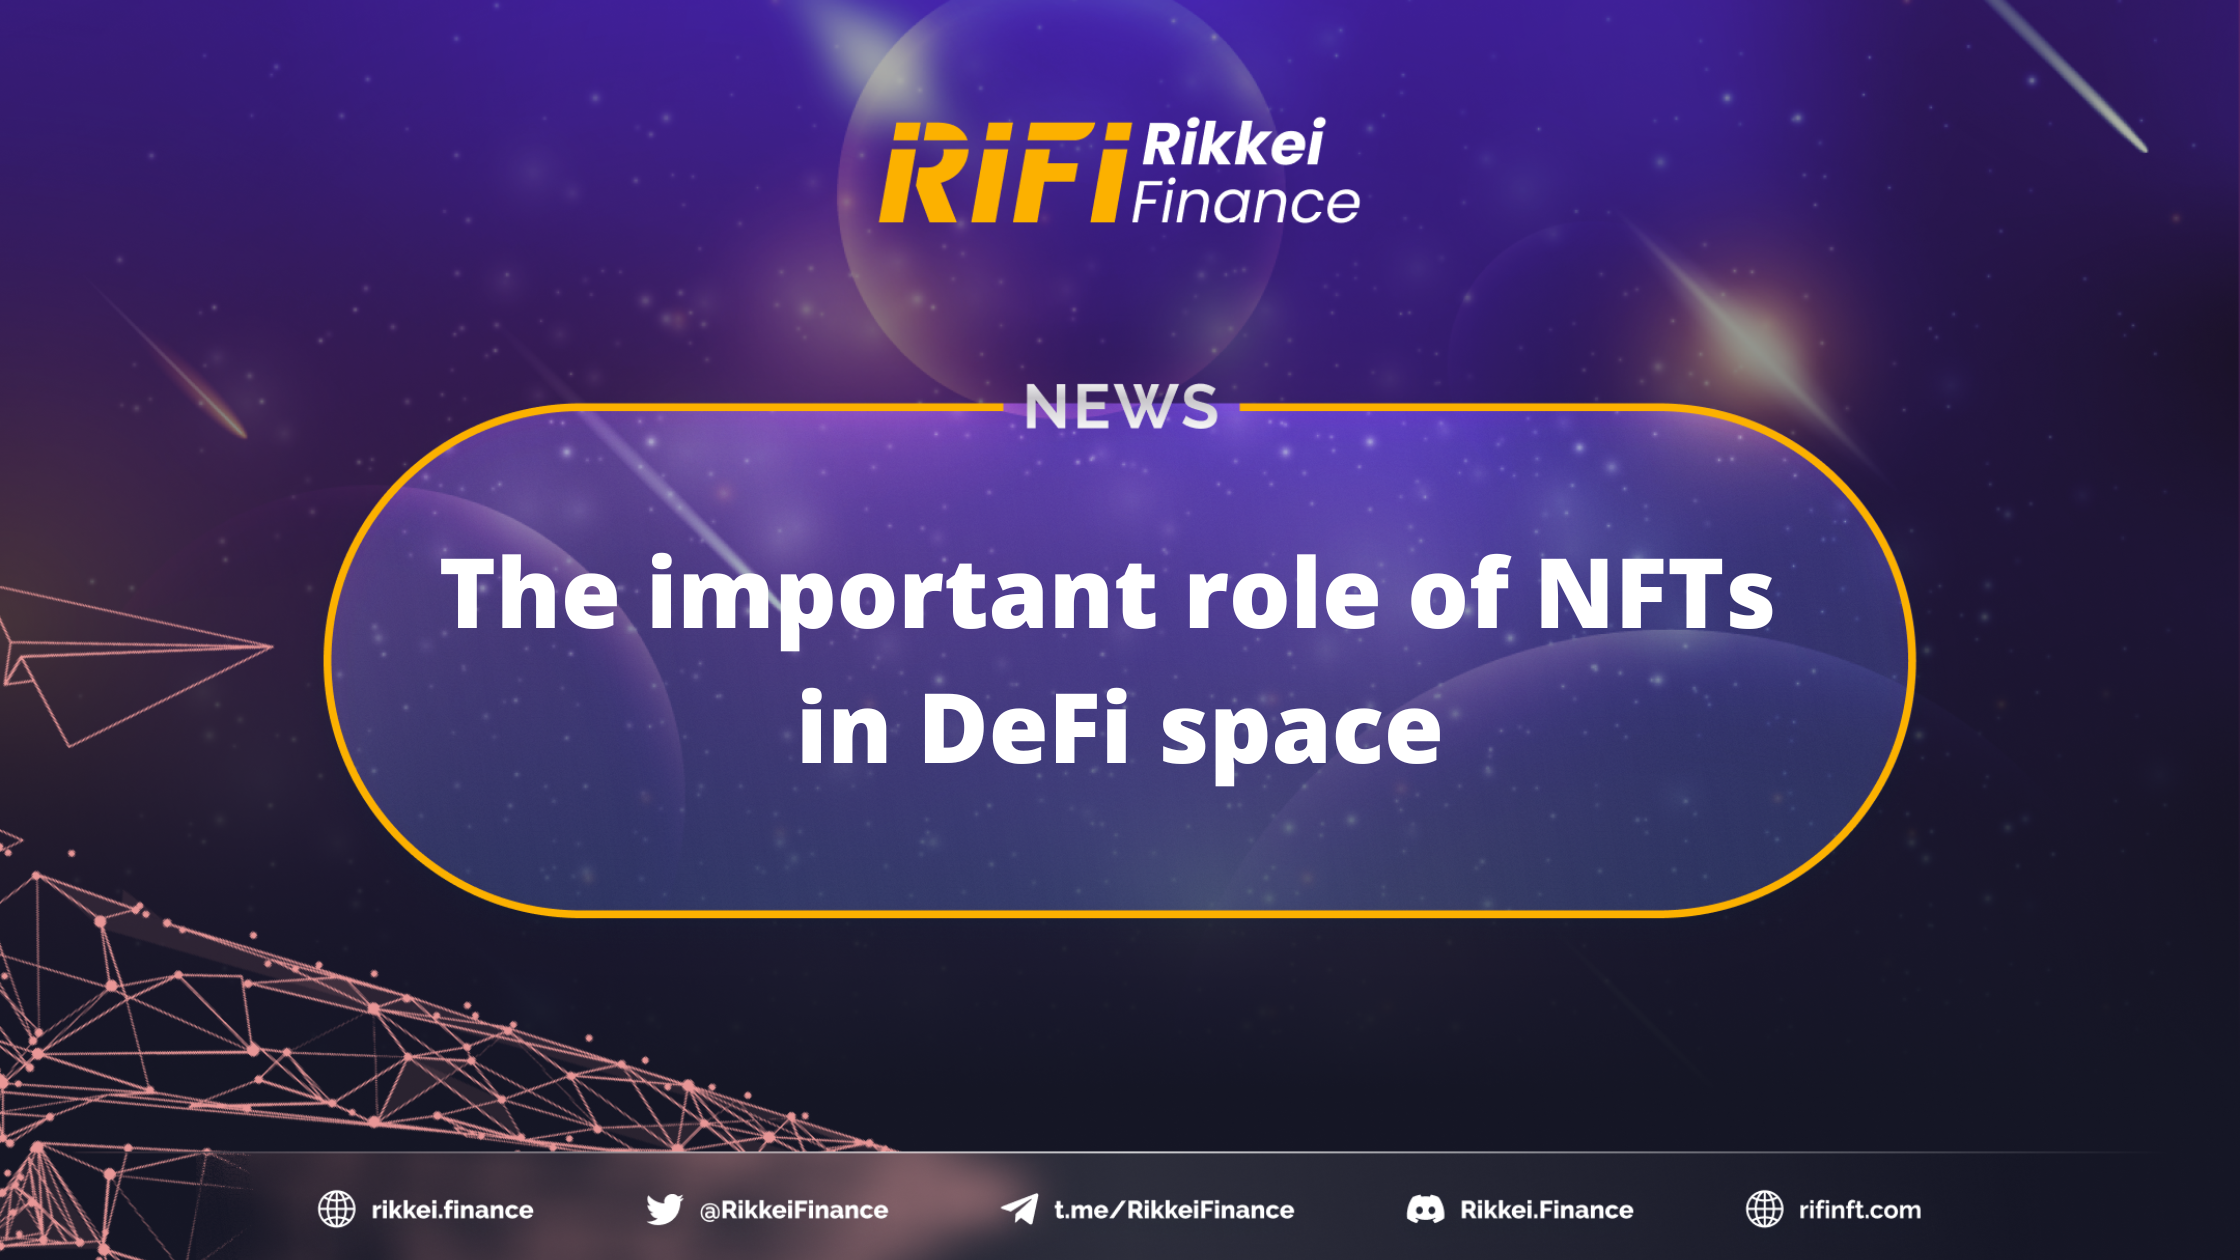 The important role of NFTs in DeFi space